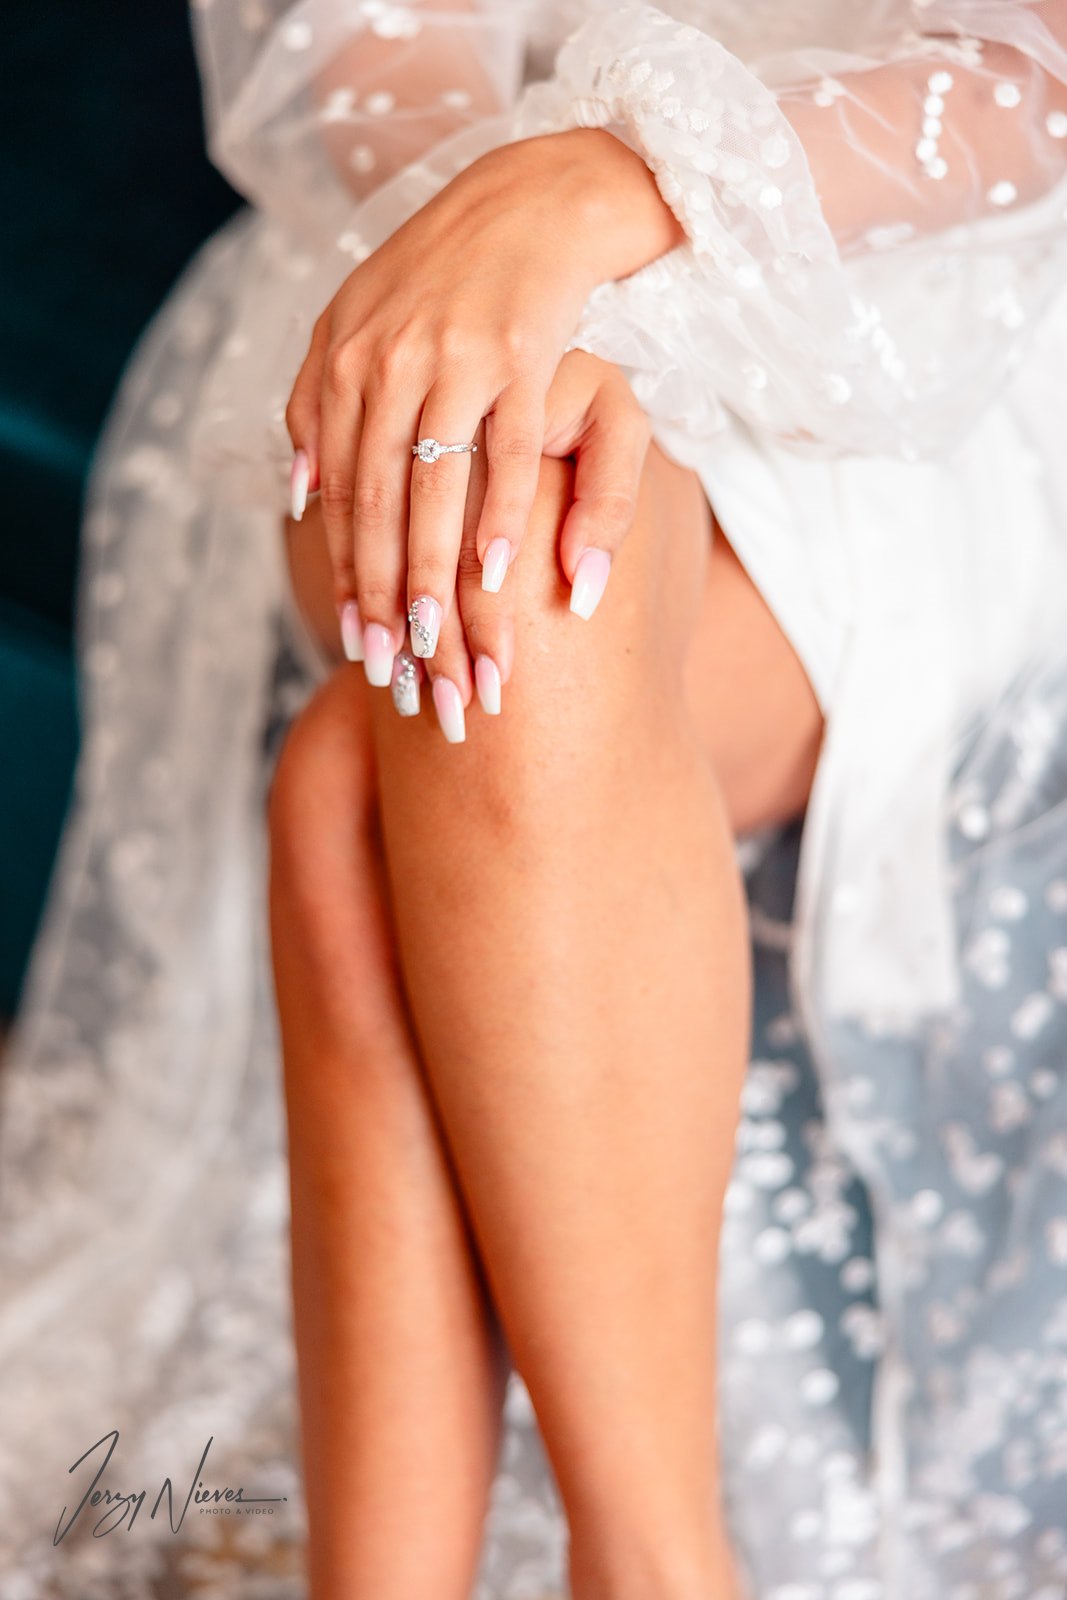 Close-up of bride Brittany’s hands resting on her knee, showing her engagement ring during pre-wedding bridal prep.